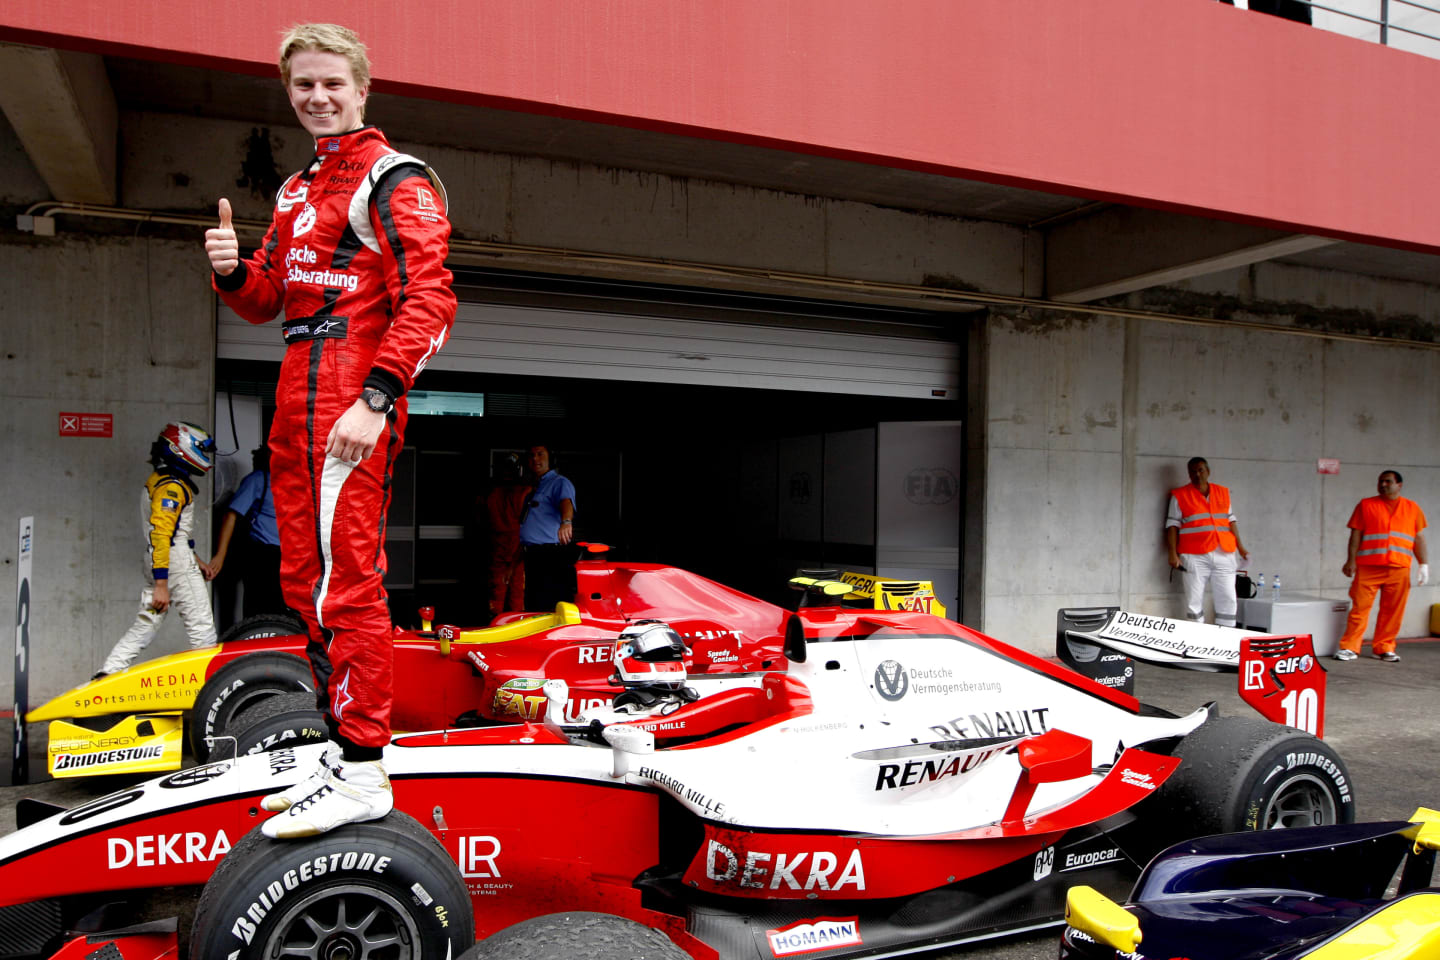 Nico Hulkenberg had a storming run to the 2009 GP2 championship, claiming five victories to win ahead of nearest rivals Vitaly Petrov and Lucas Di Grassi. The performance led to the German getting a ride with Williams for 2010, with Hulkenberg sensationally putting his car on pole for that year’s Brazilian Grand Prix.